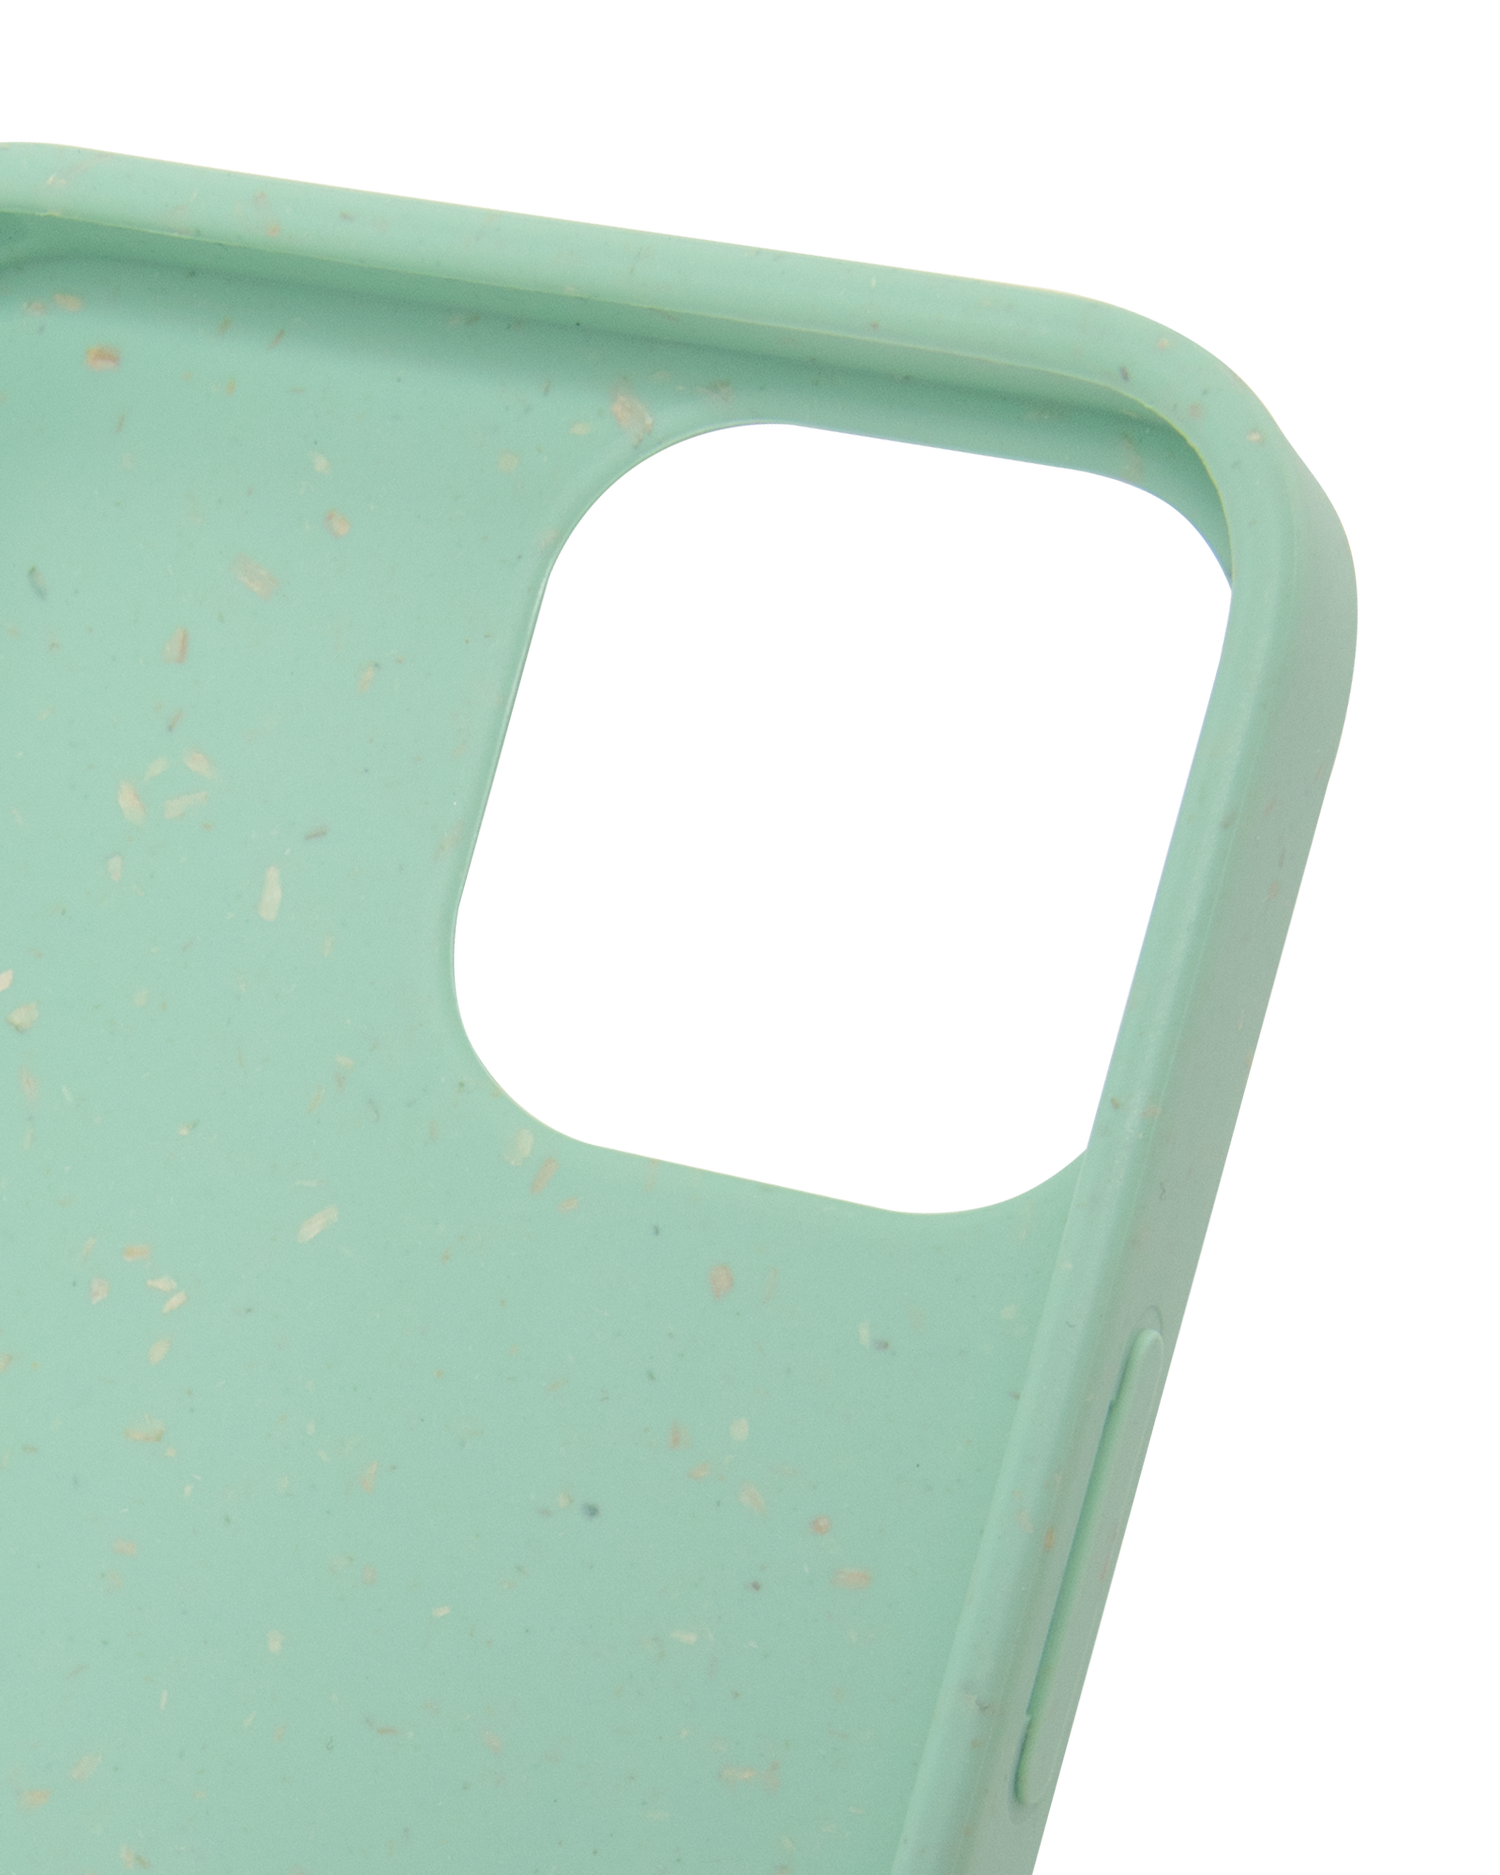 Light Green Eco-Friendly Phone Case for Apple iPhone 12 mini: Details inside